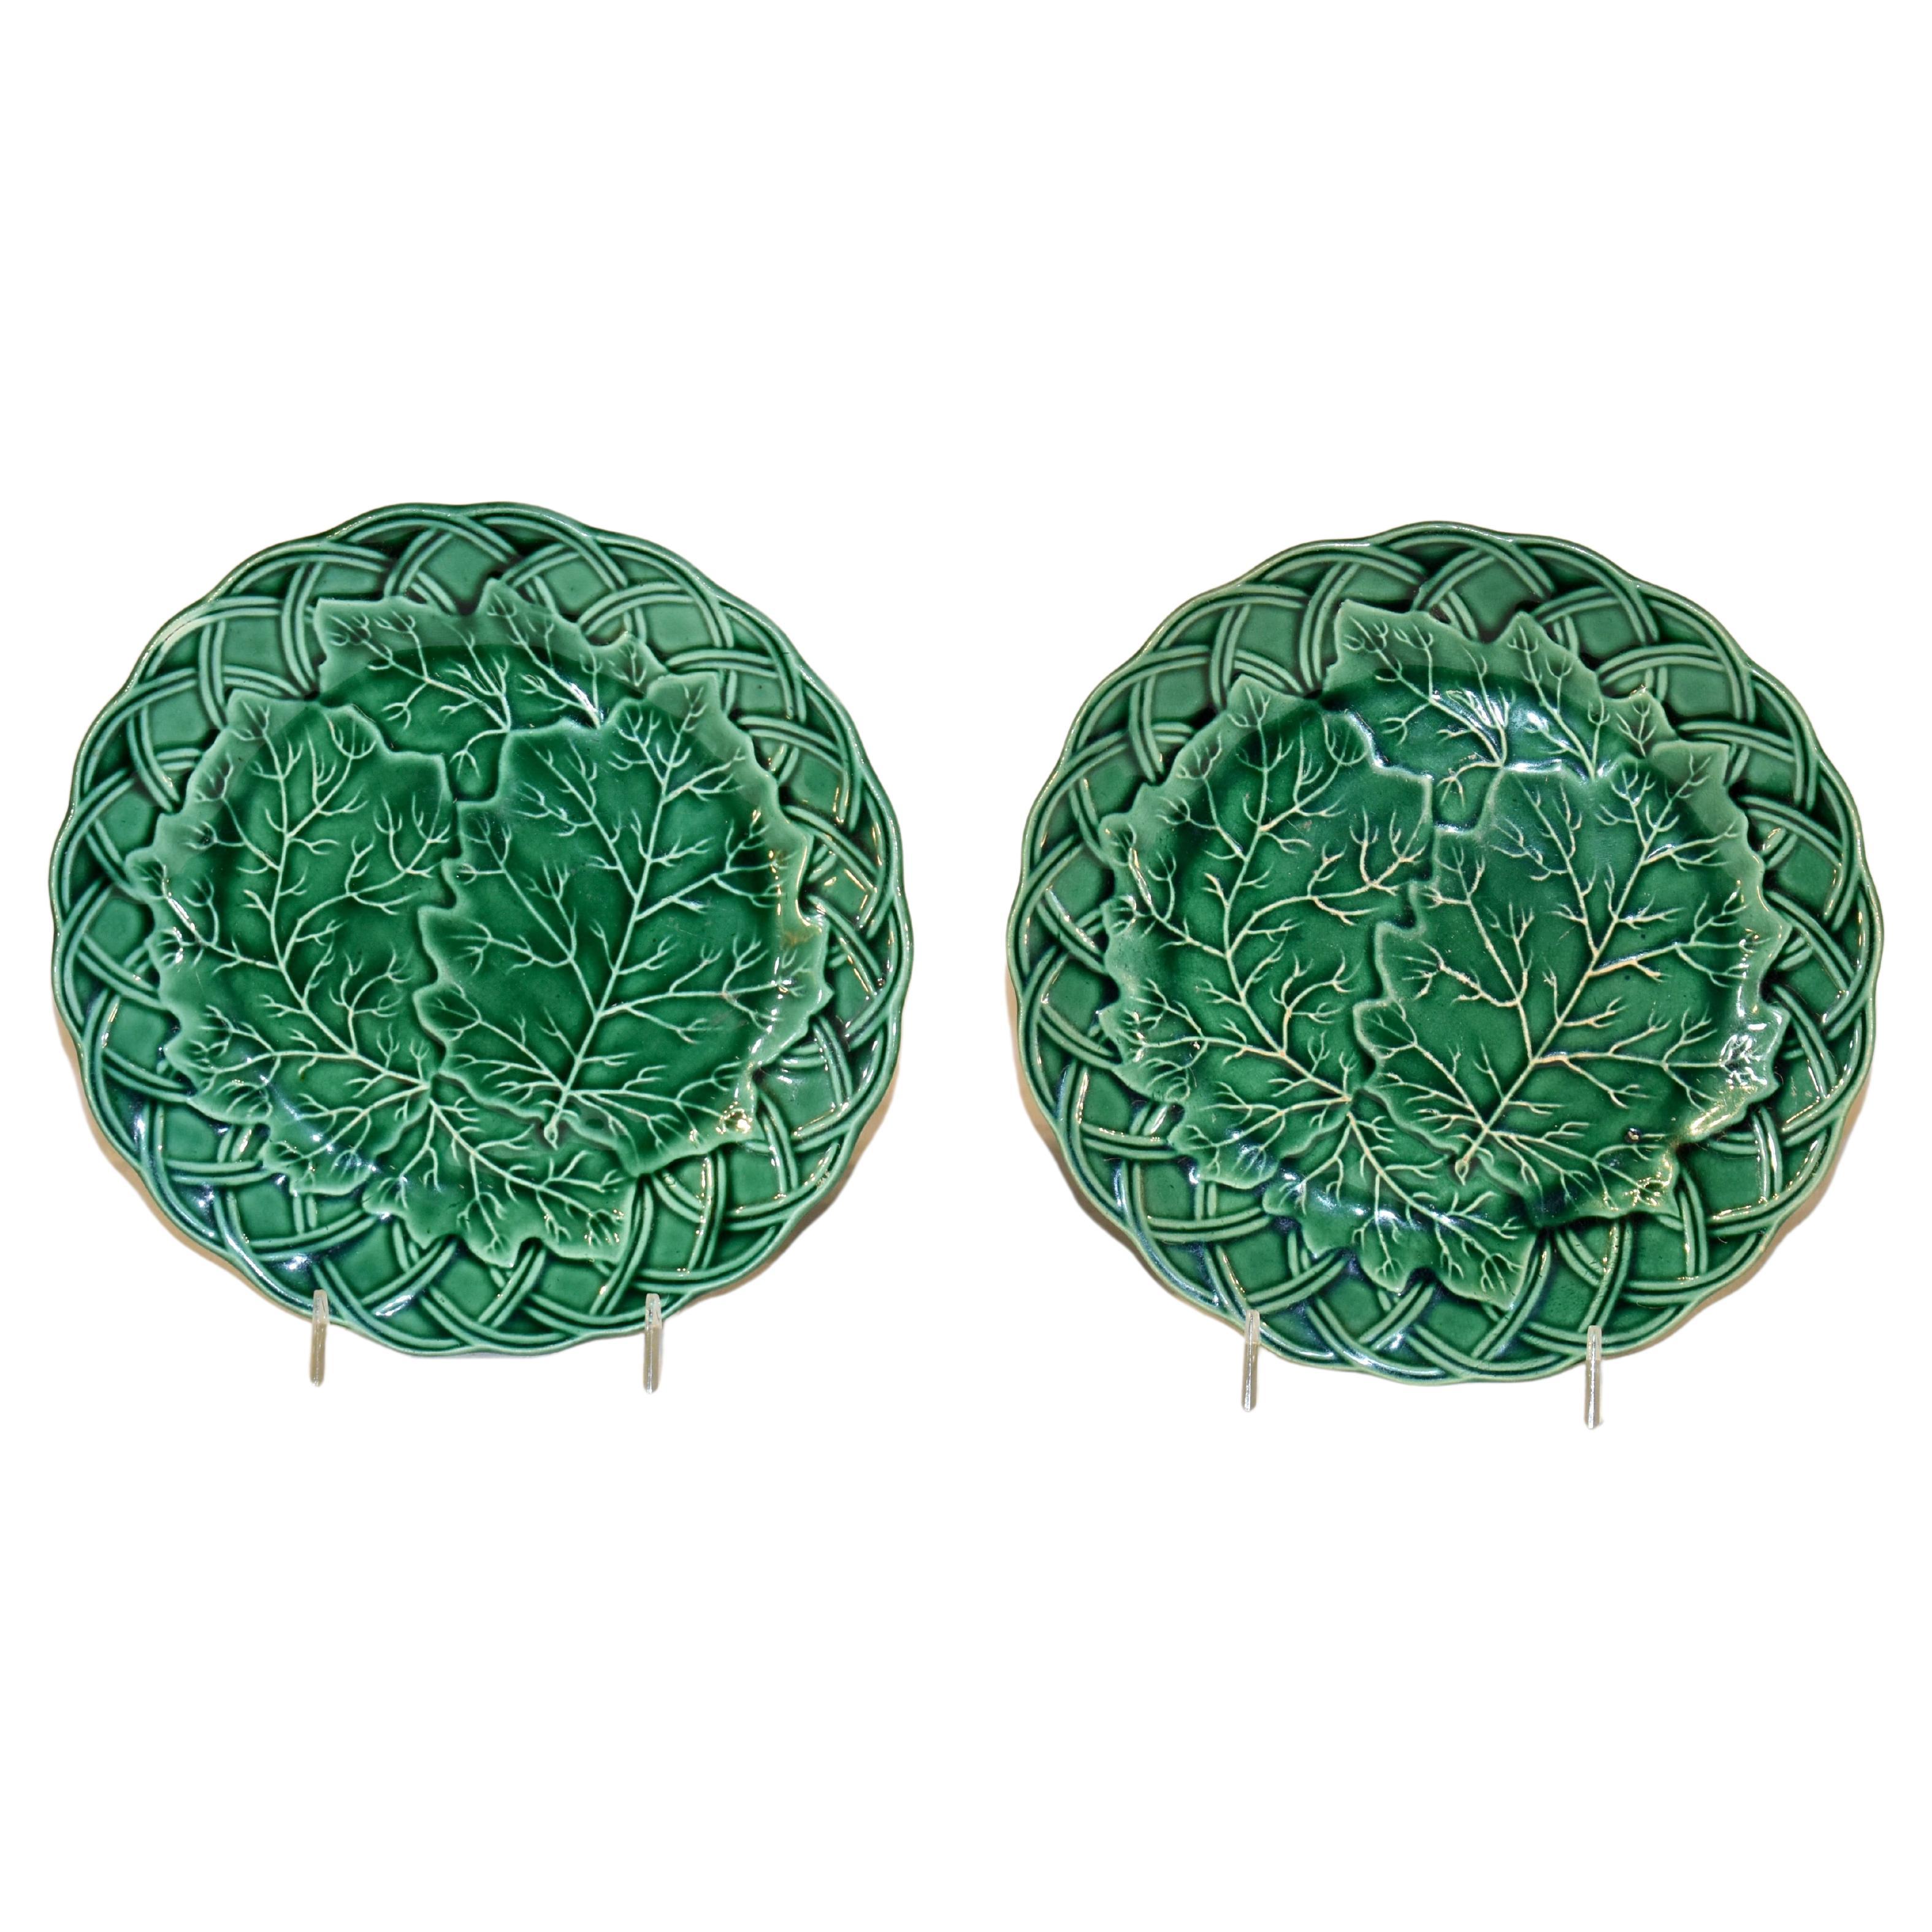 Pair of 19th Century Majolica Plates For Sale